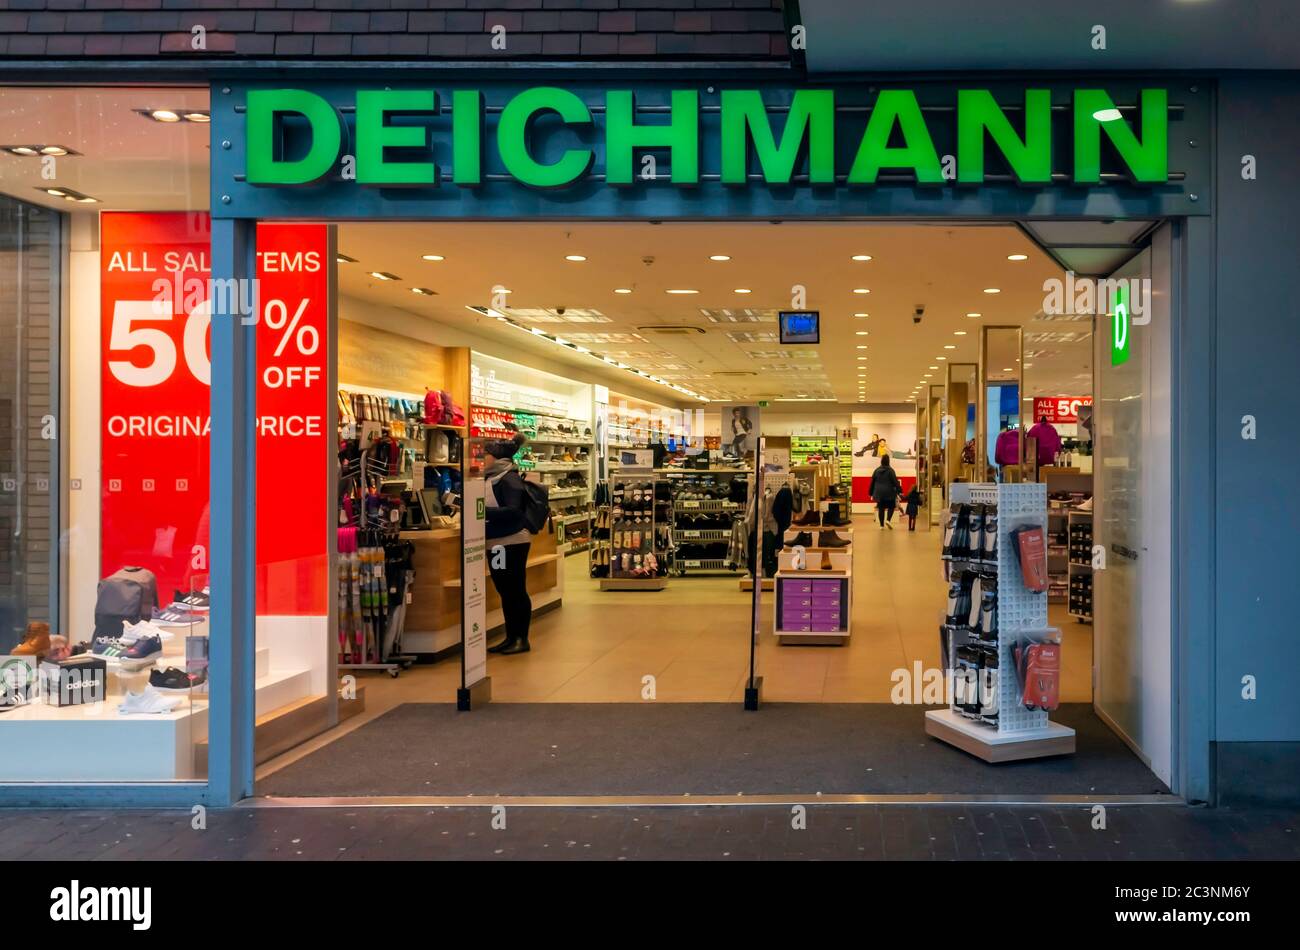 Deichmann High Resolution Stock Photography and Images - Alamy